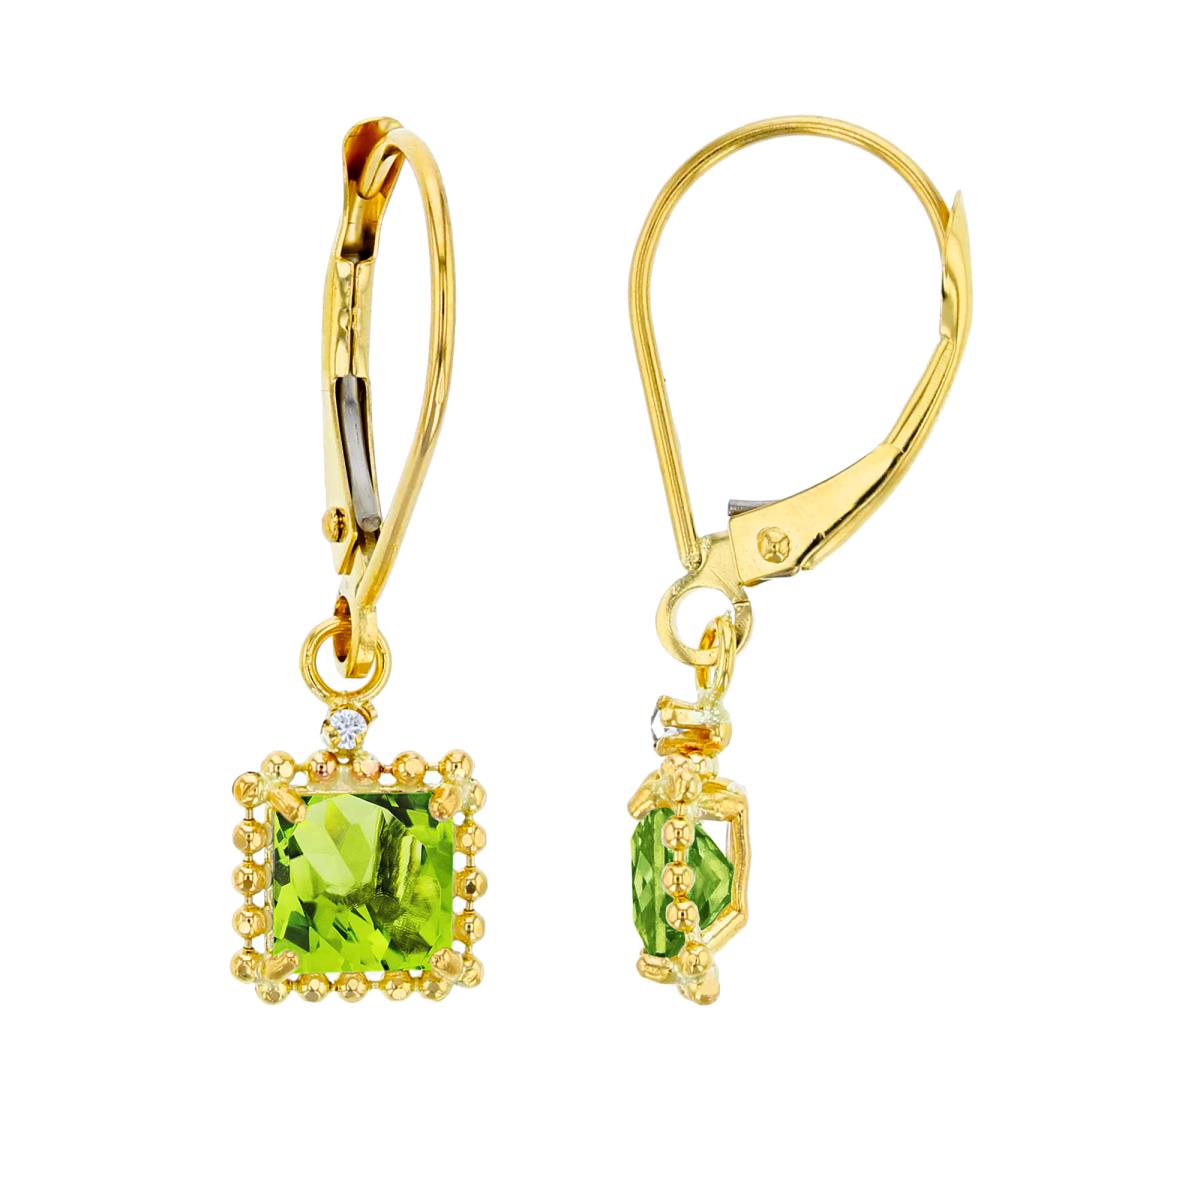 14K Yellow Gold 1.25mm Rd Created White Sapphire & 5mm Sq Peridot Bead Frame Drop Lever-Back Earring